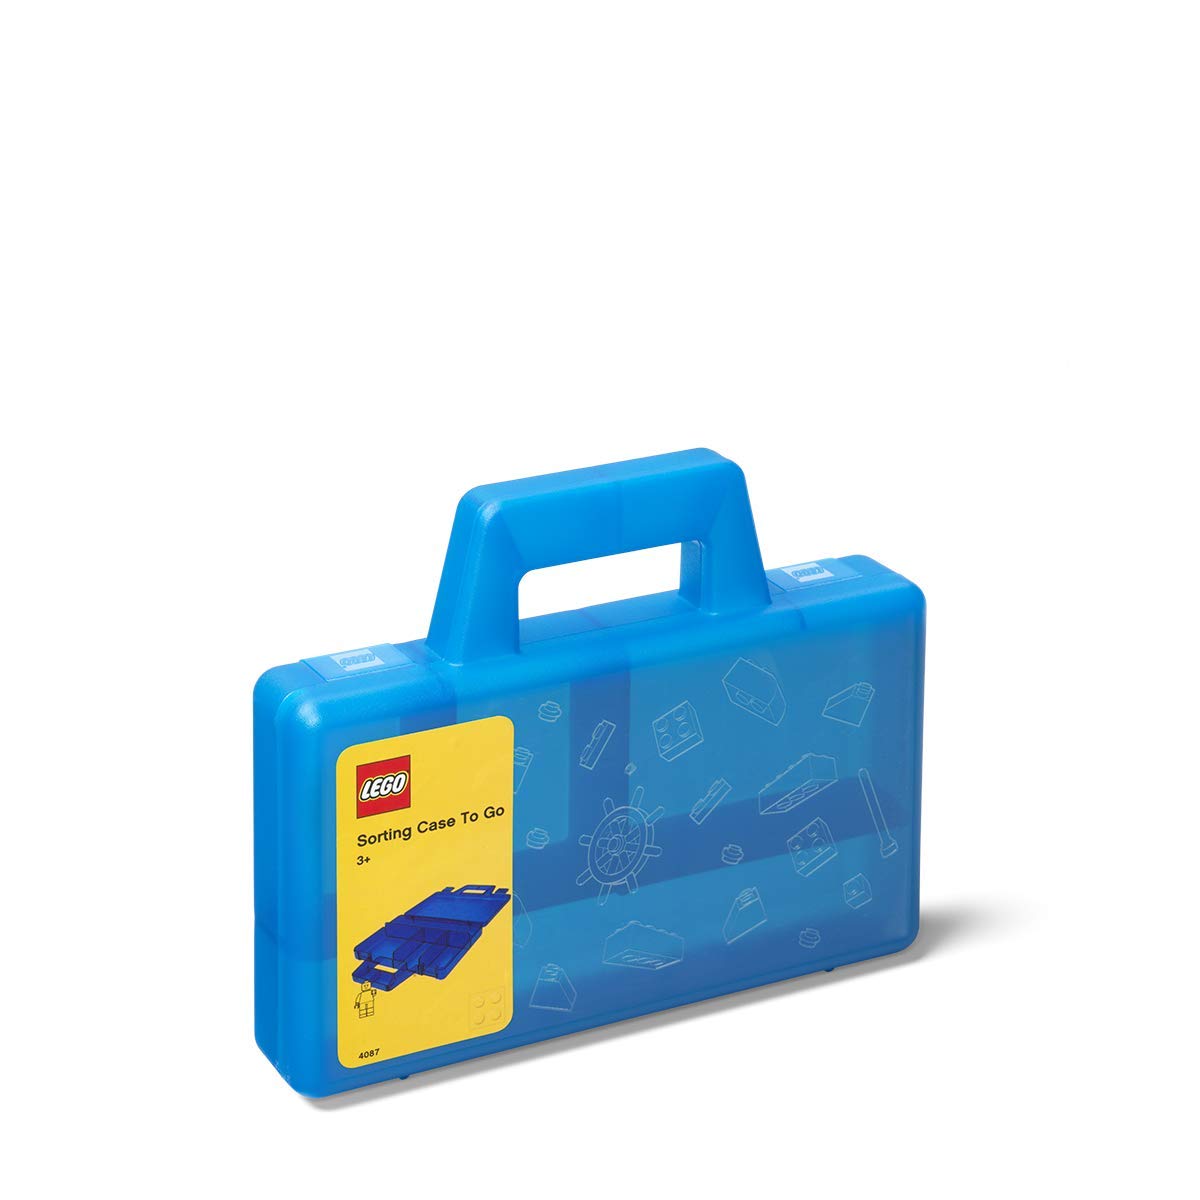 Room Copenhagen, Lego Sorting Box to-Go - Travel Case with Organizing Dividers - Blue